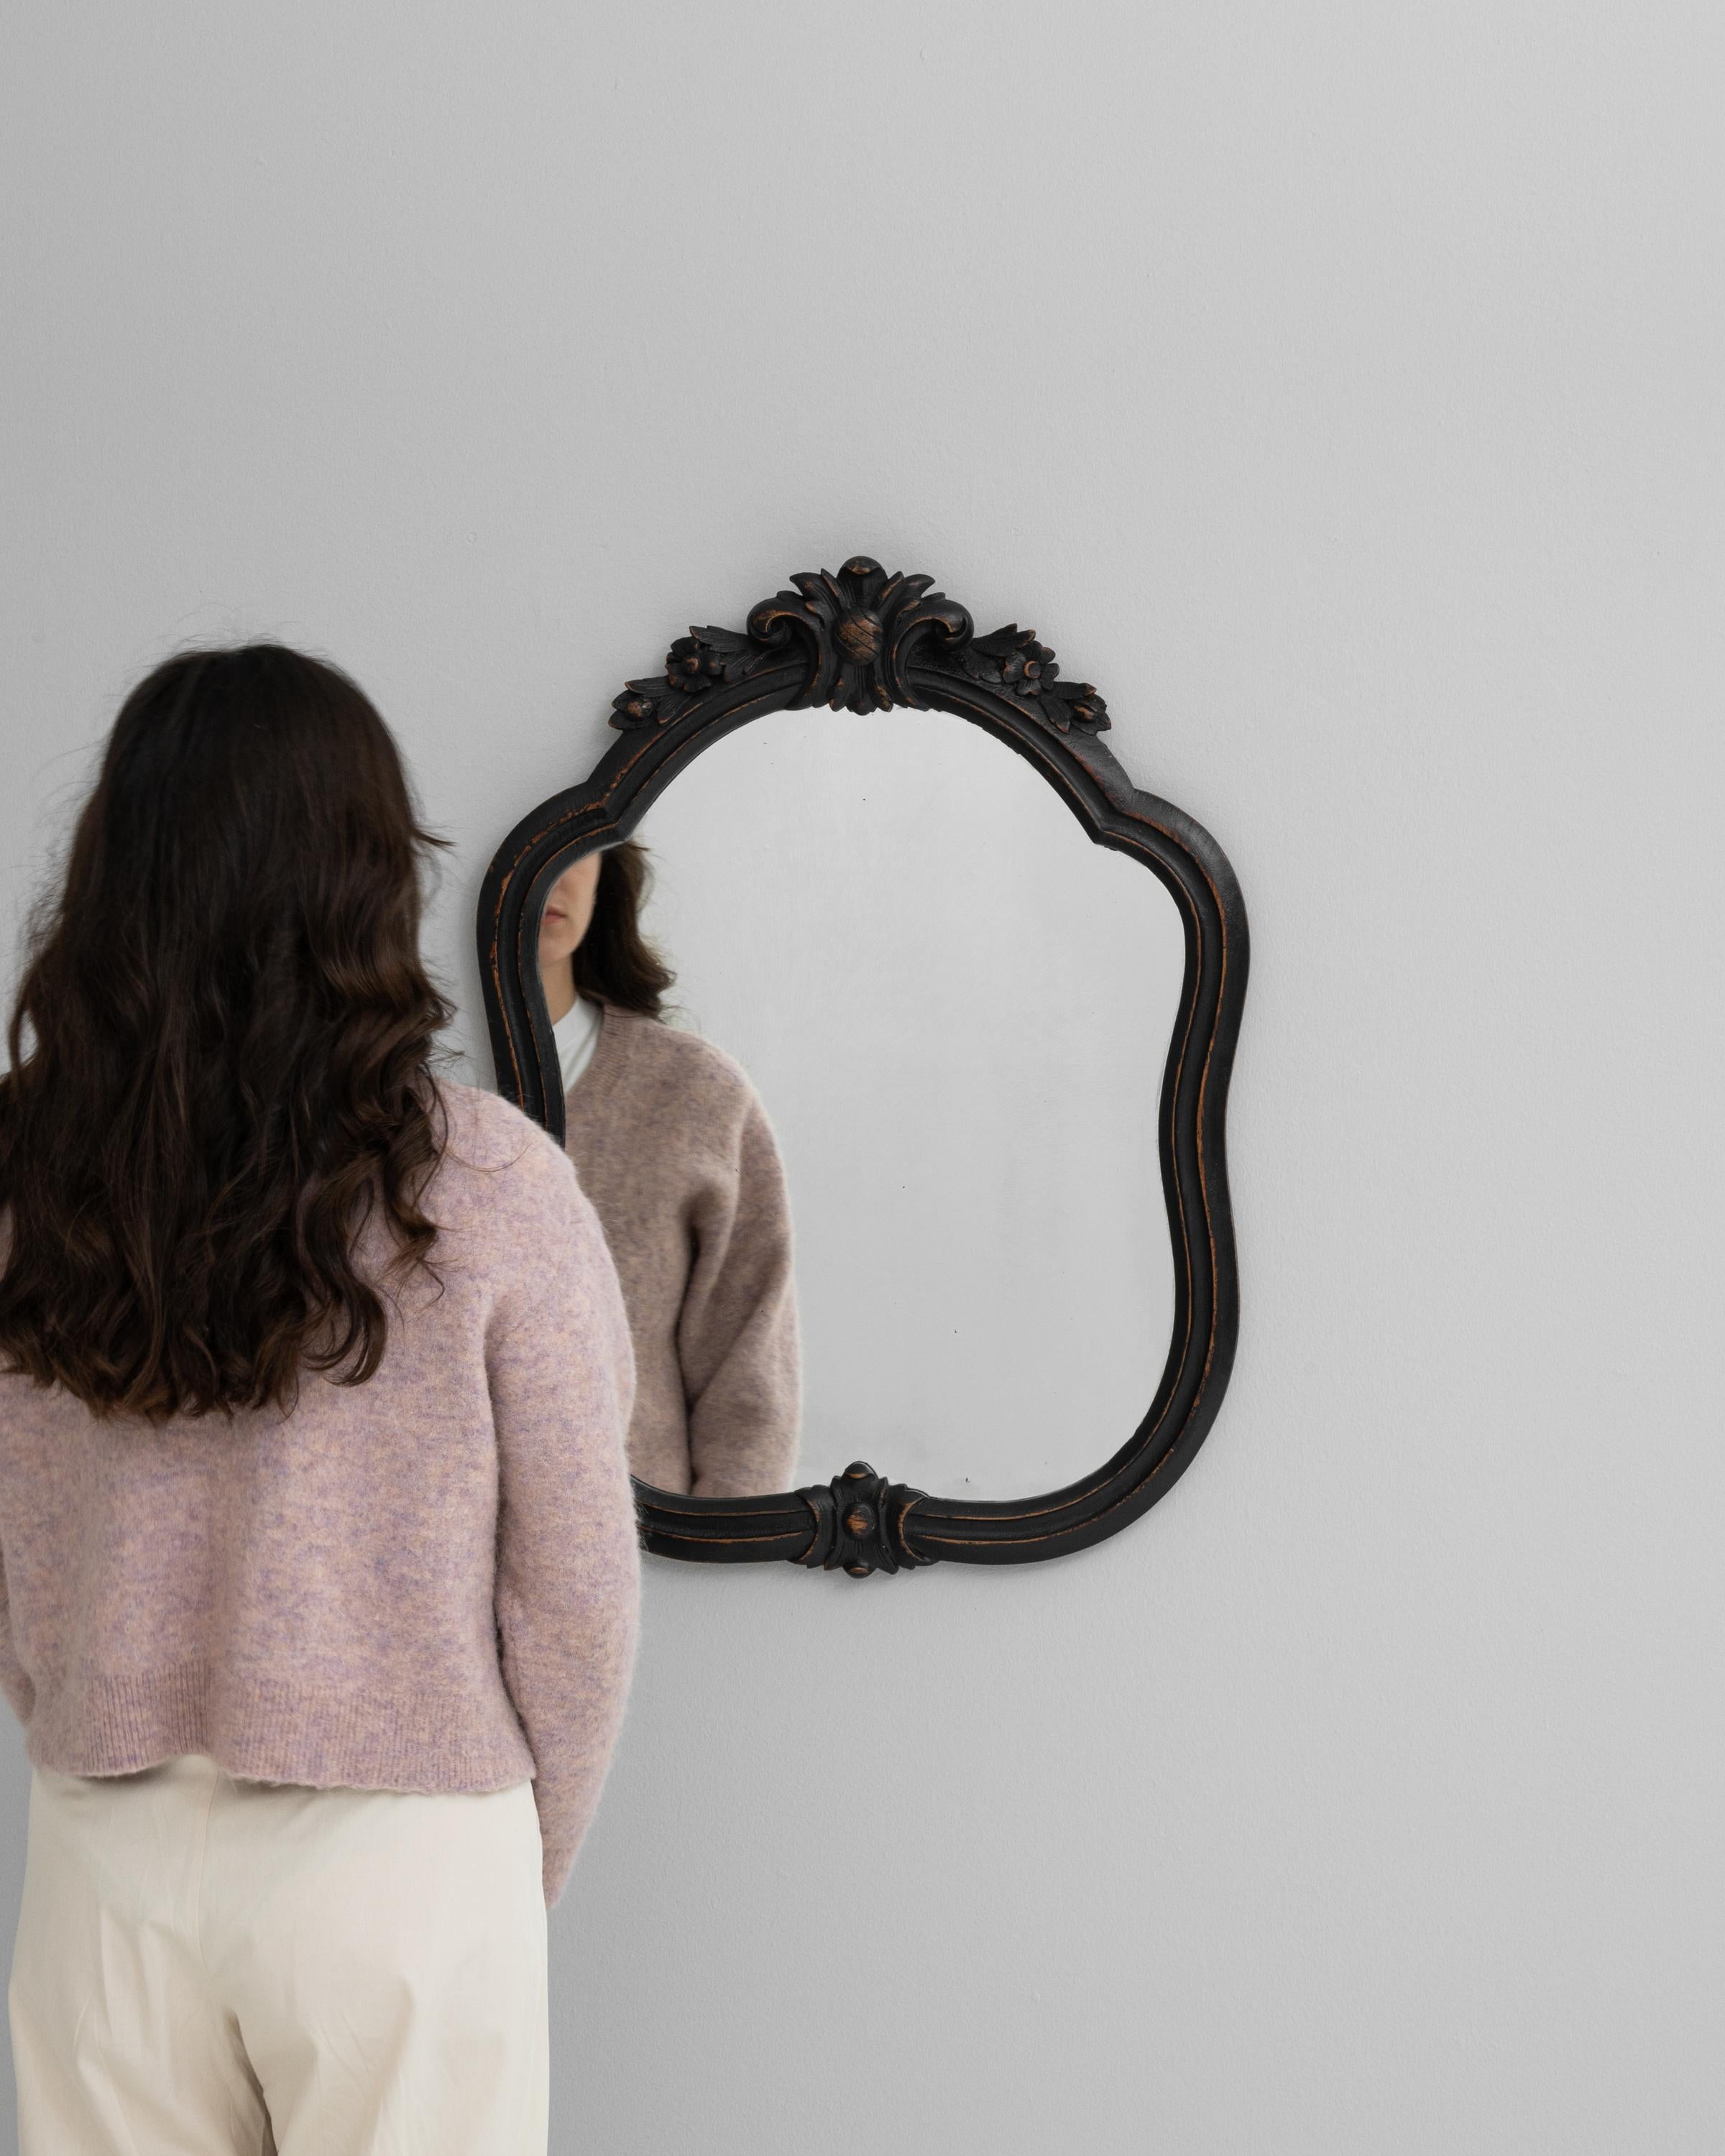 Step into a world where classic design meets timeless elegance with this 20th Century French Wood Black Patinated Mirror. The sculptural frame, black with a hint of patina, showcases the meticulous craftsmanship of the period with its delicate